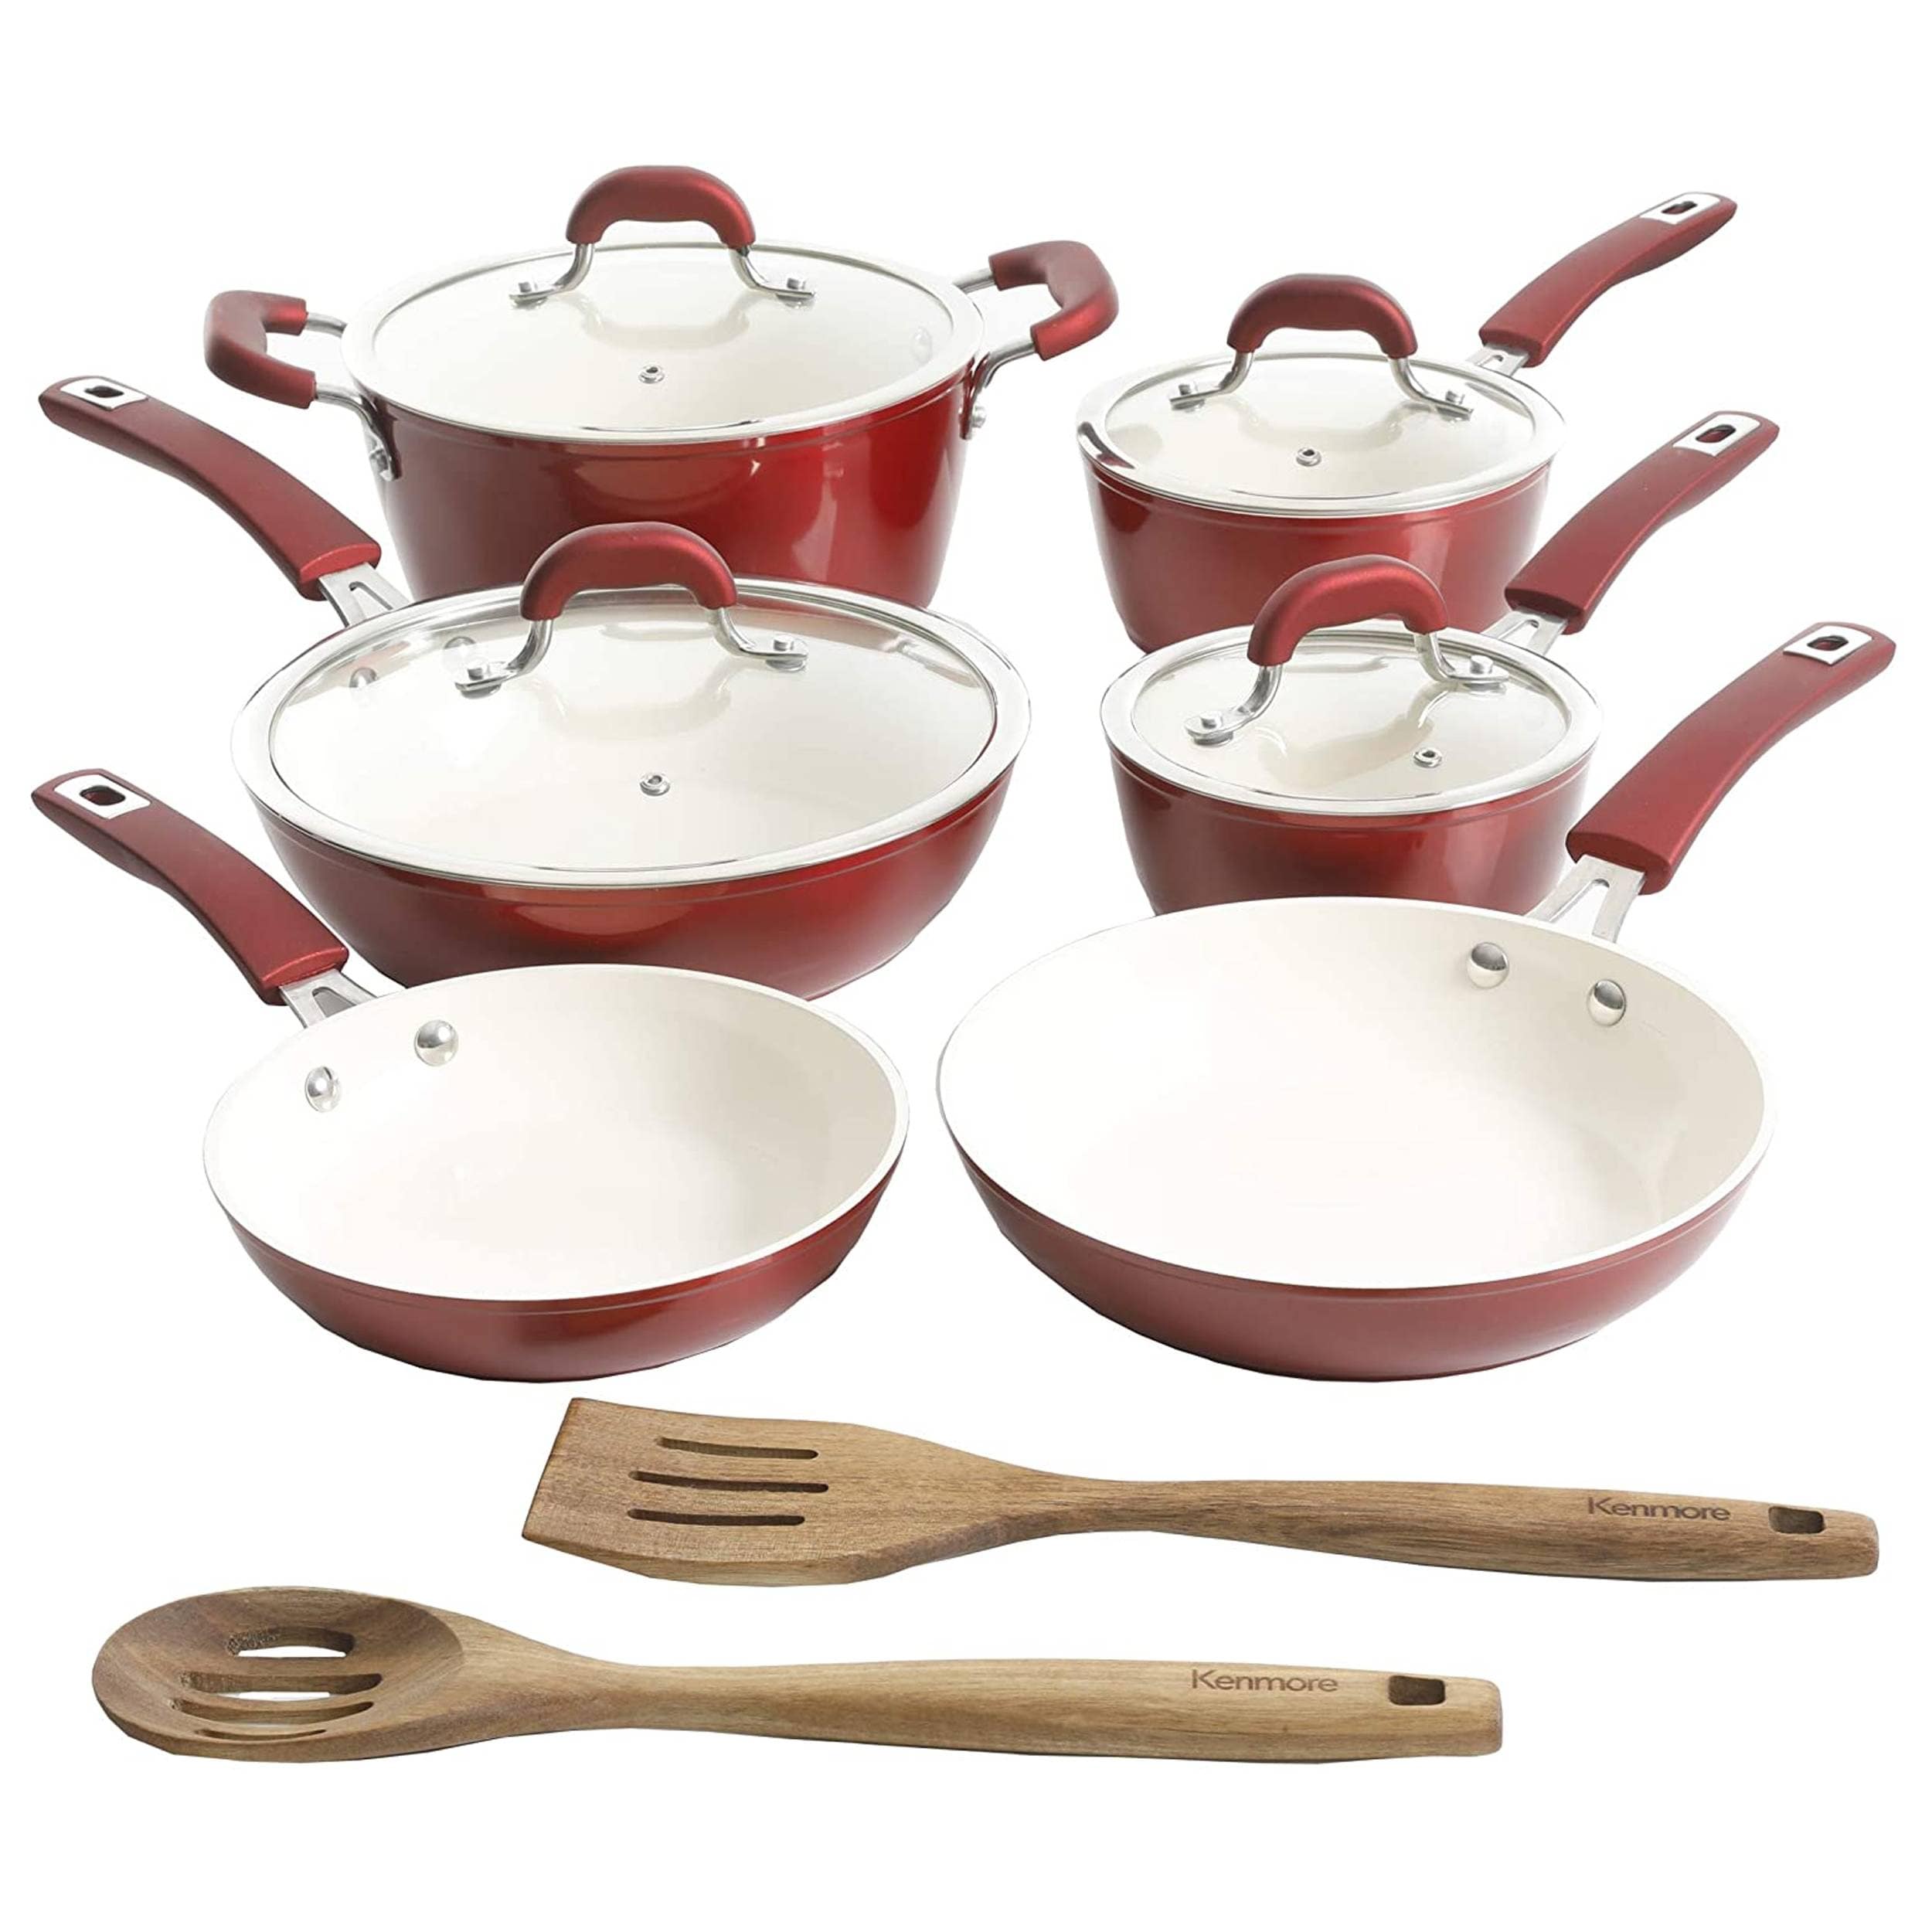 Kenmore 12-Piece 13.2-in Aluminum Cookware Set with Lid(s) Included